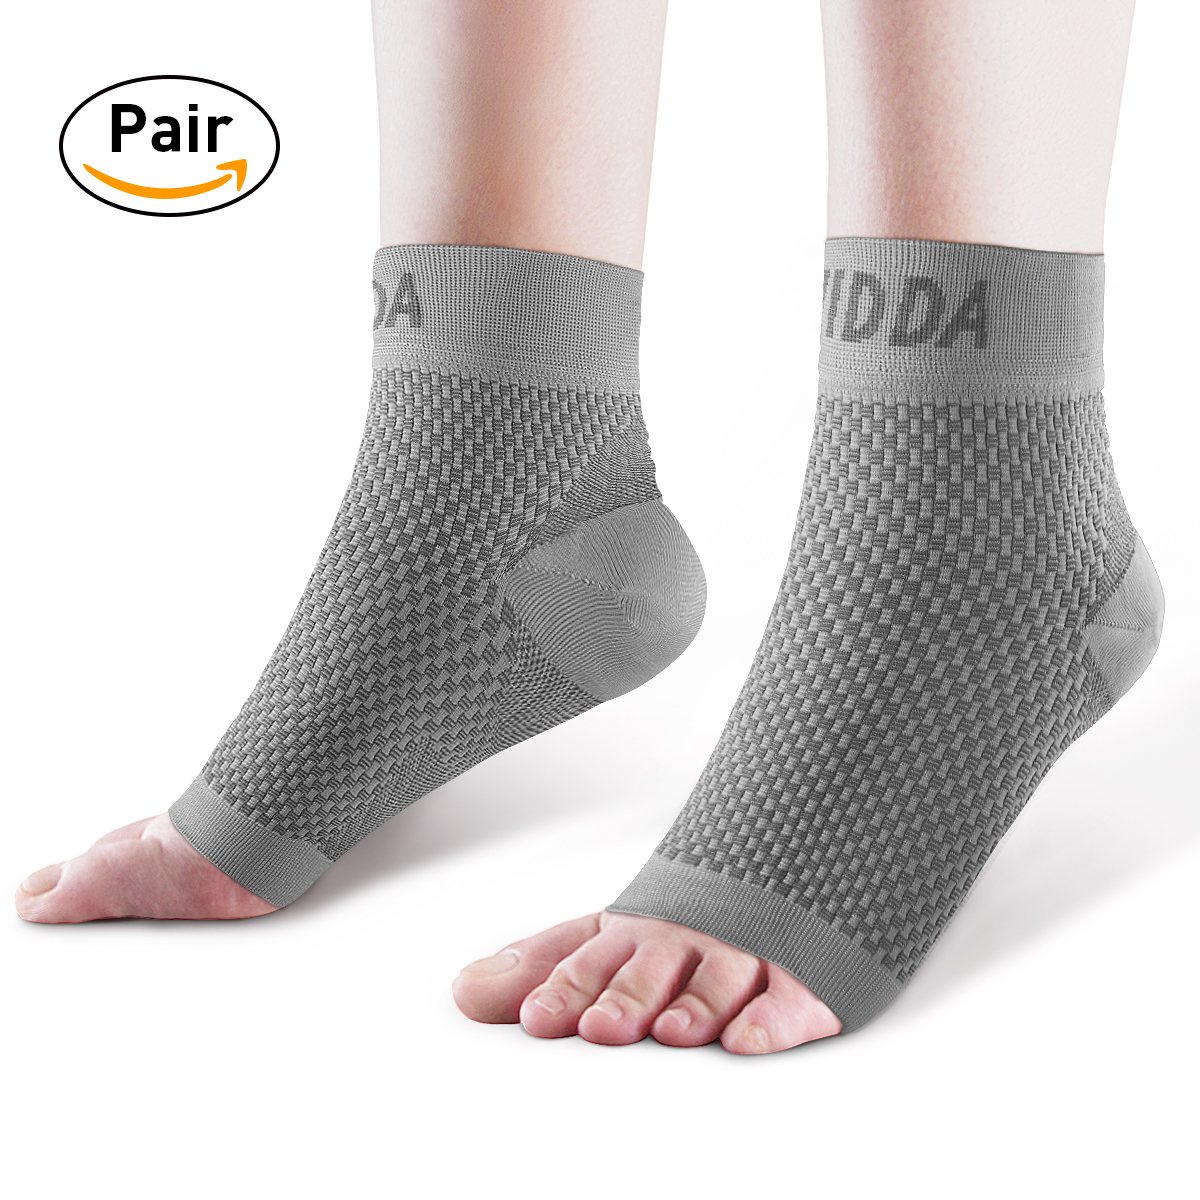 Ankle Brace for Men Women Pair AVIDDA Plantar Fasciitis Socks with Arch Support Compression Ankle Support Foot Sleeve for Achilles Tendon Support Swelling Eases Heel Pain Relief Gray Medium